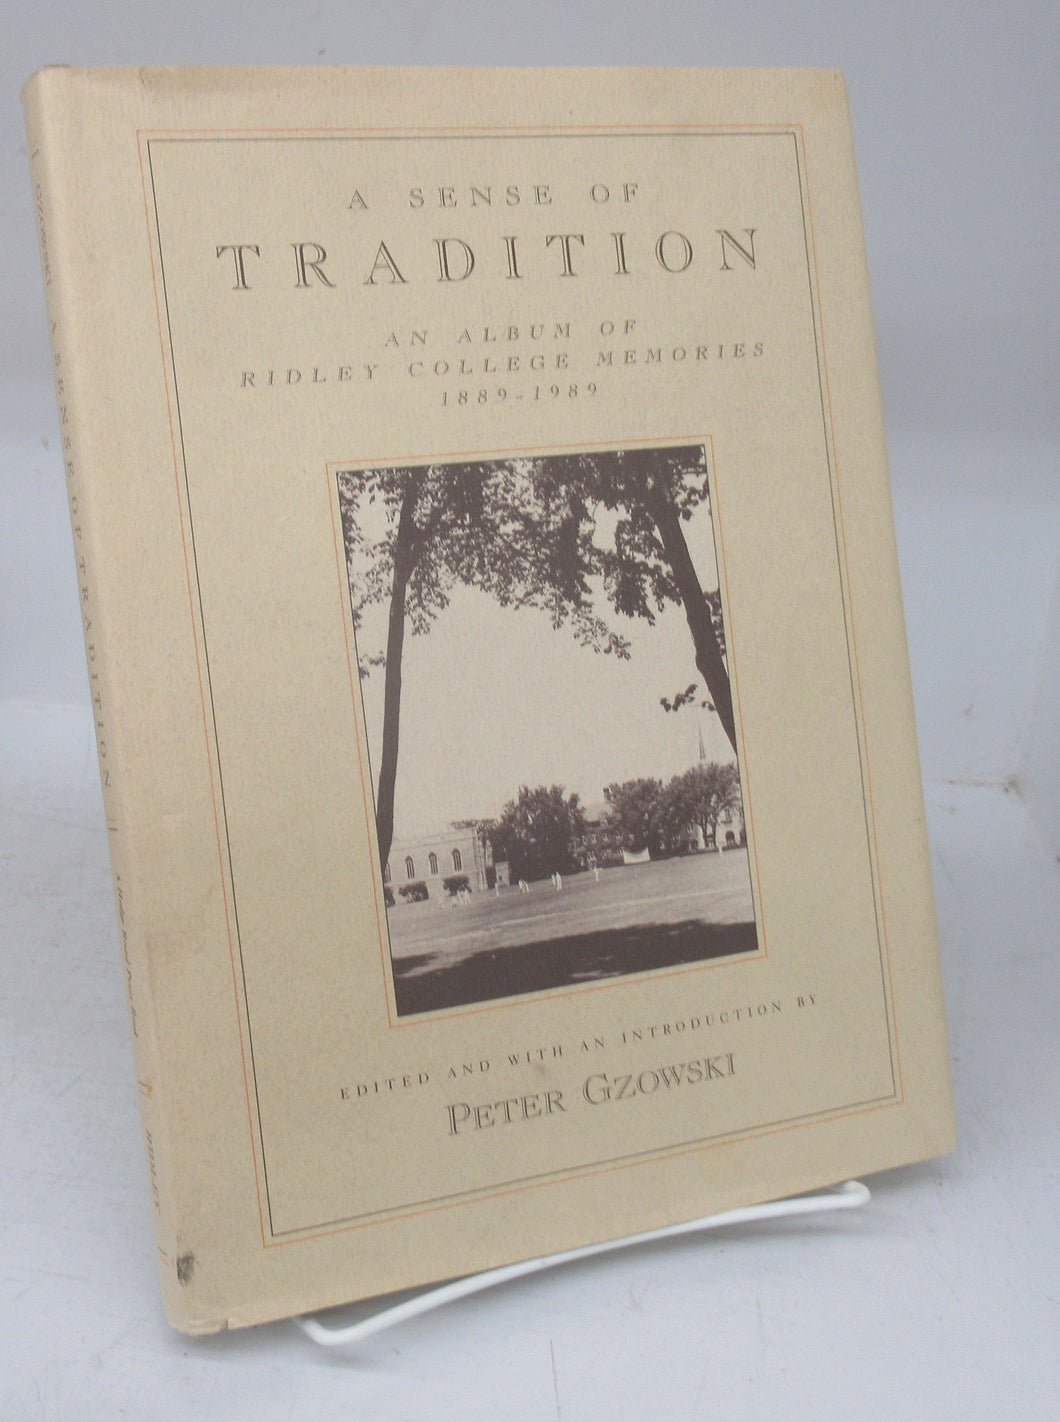 A Sense of Tradition: An Album of Ridley College Memories 1889-1989